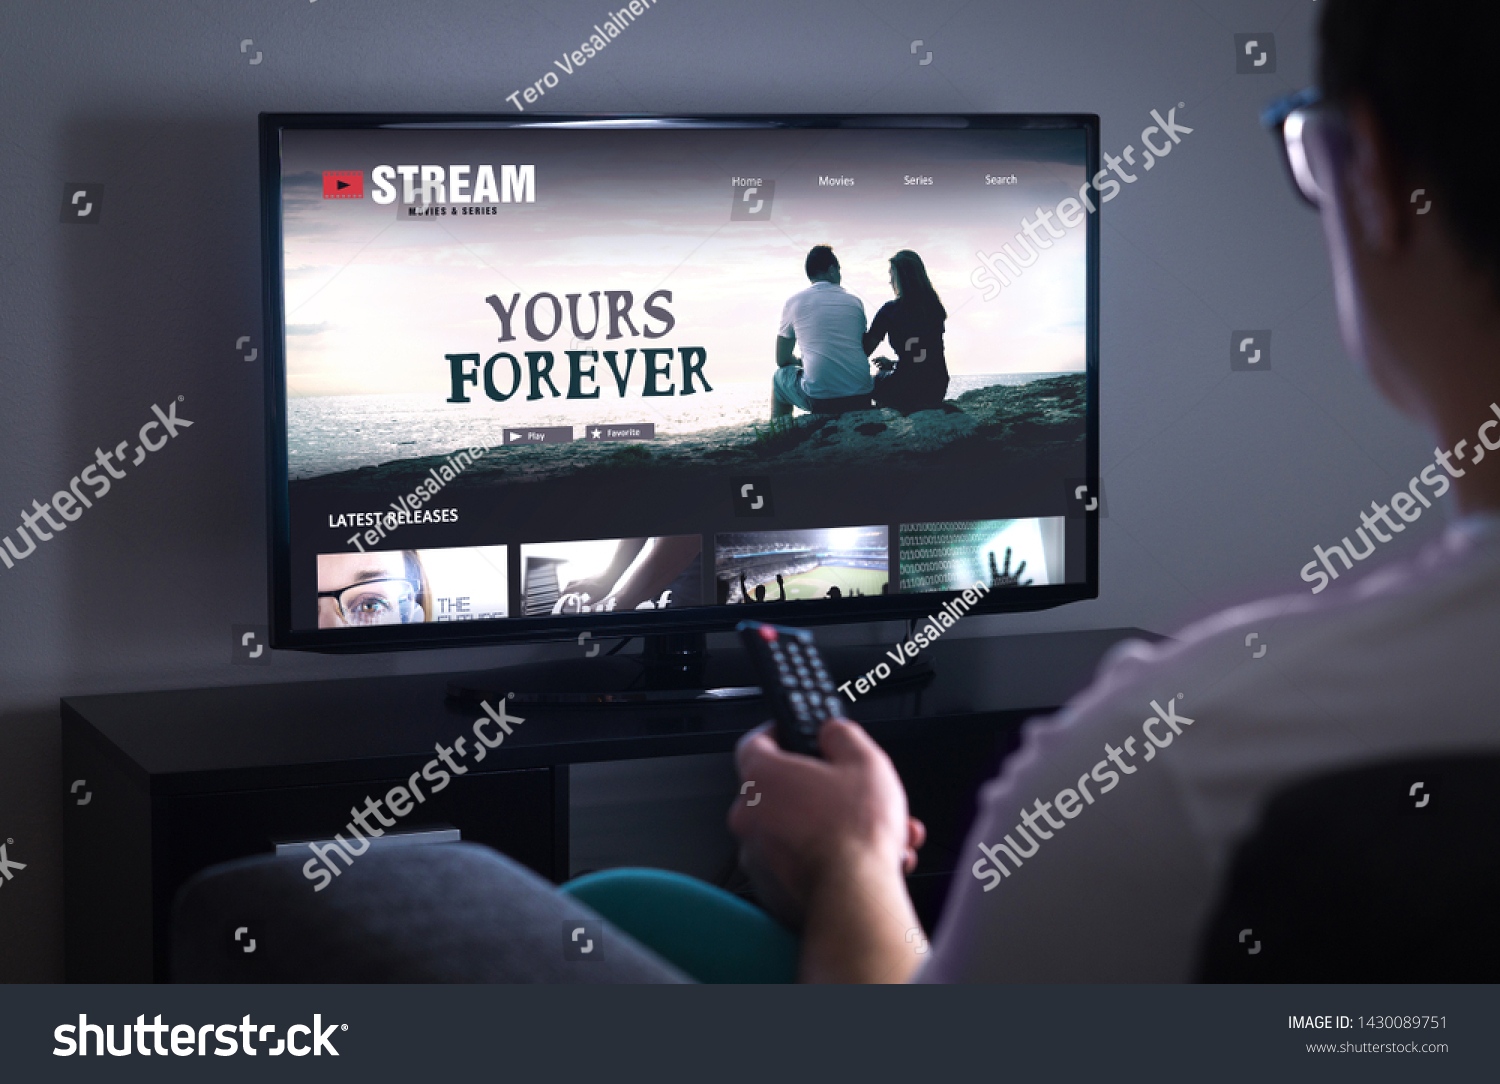 Online movie stream service in smart tv. Streaming series with on demand video (VOD) service in television. Man choosing film to watch with remote. Person sitting on couch at home late at night.